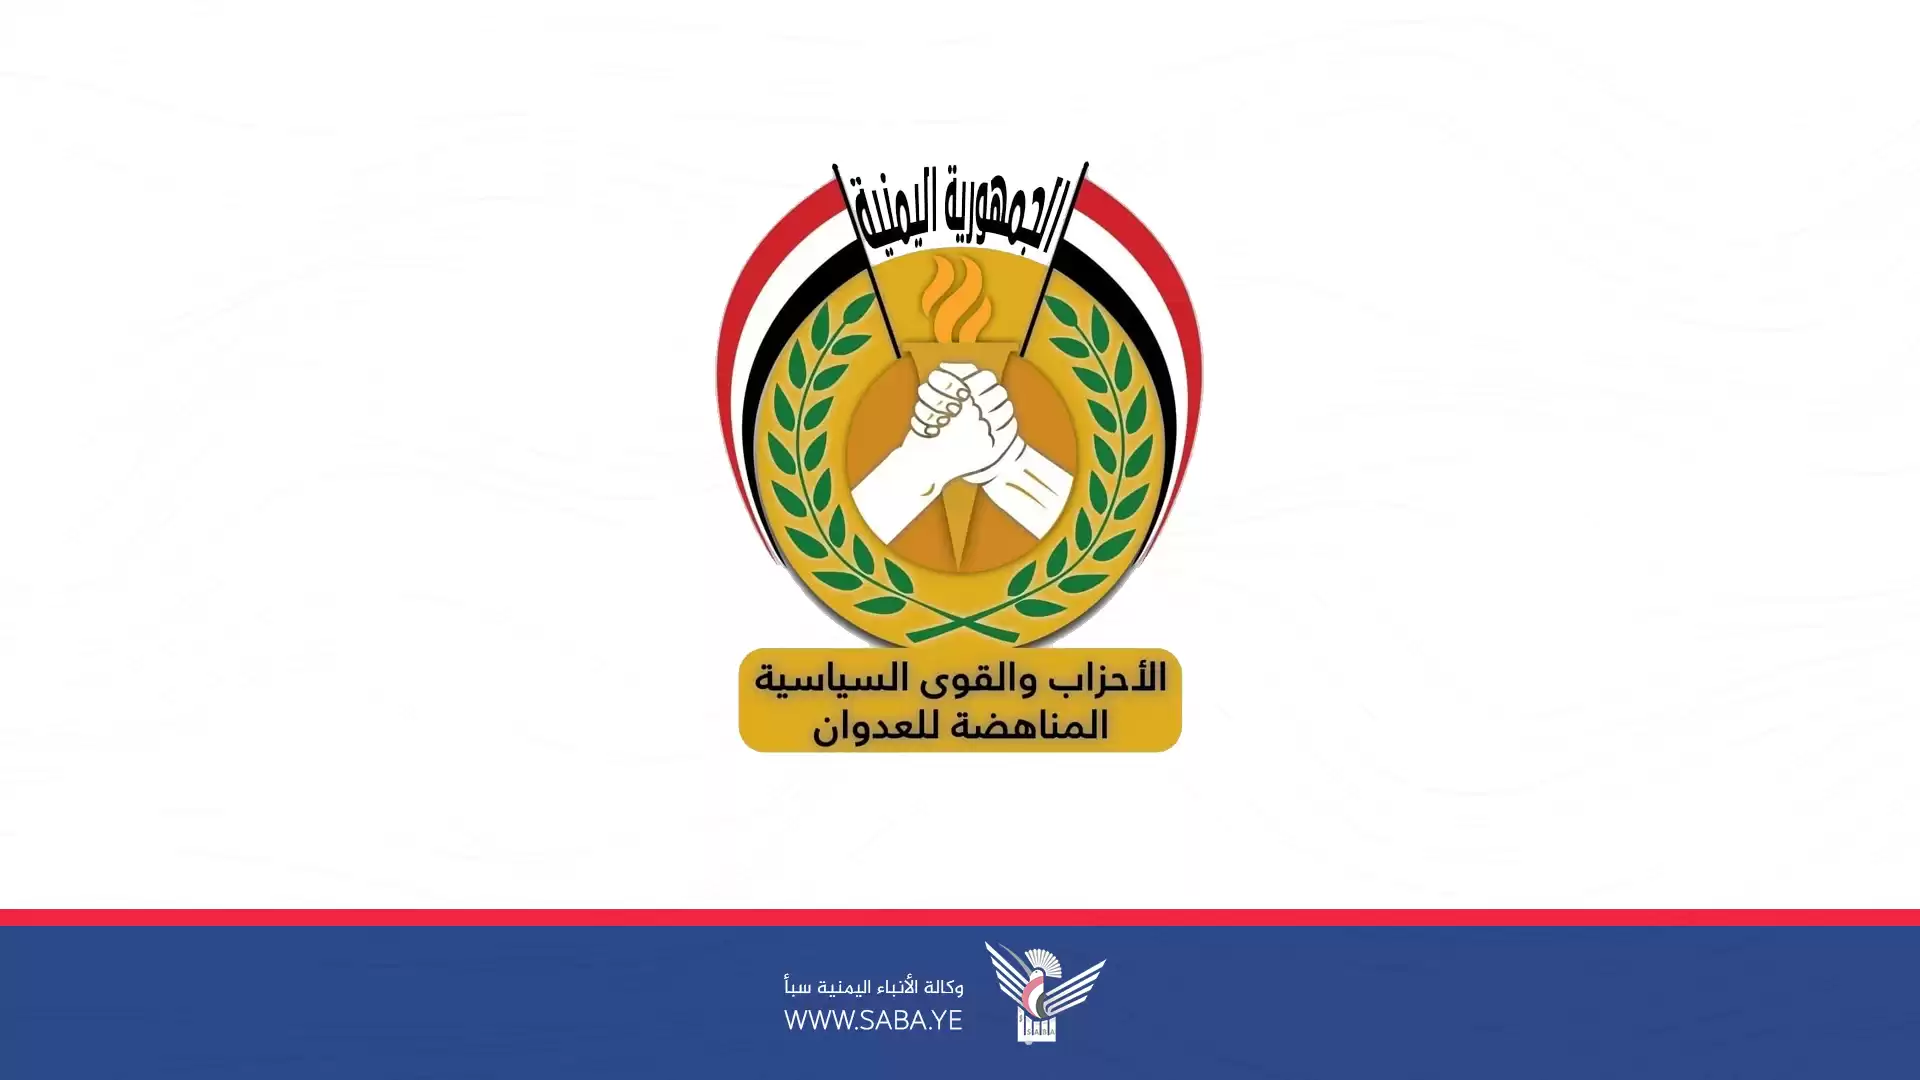 Revolutionary leadership receives congratulations on Eid al-Adha from coalition of anti-aggression parties